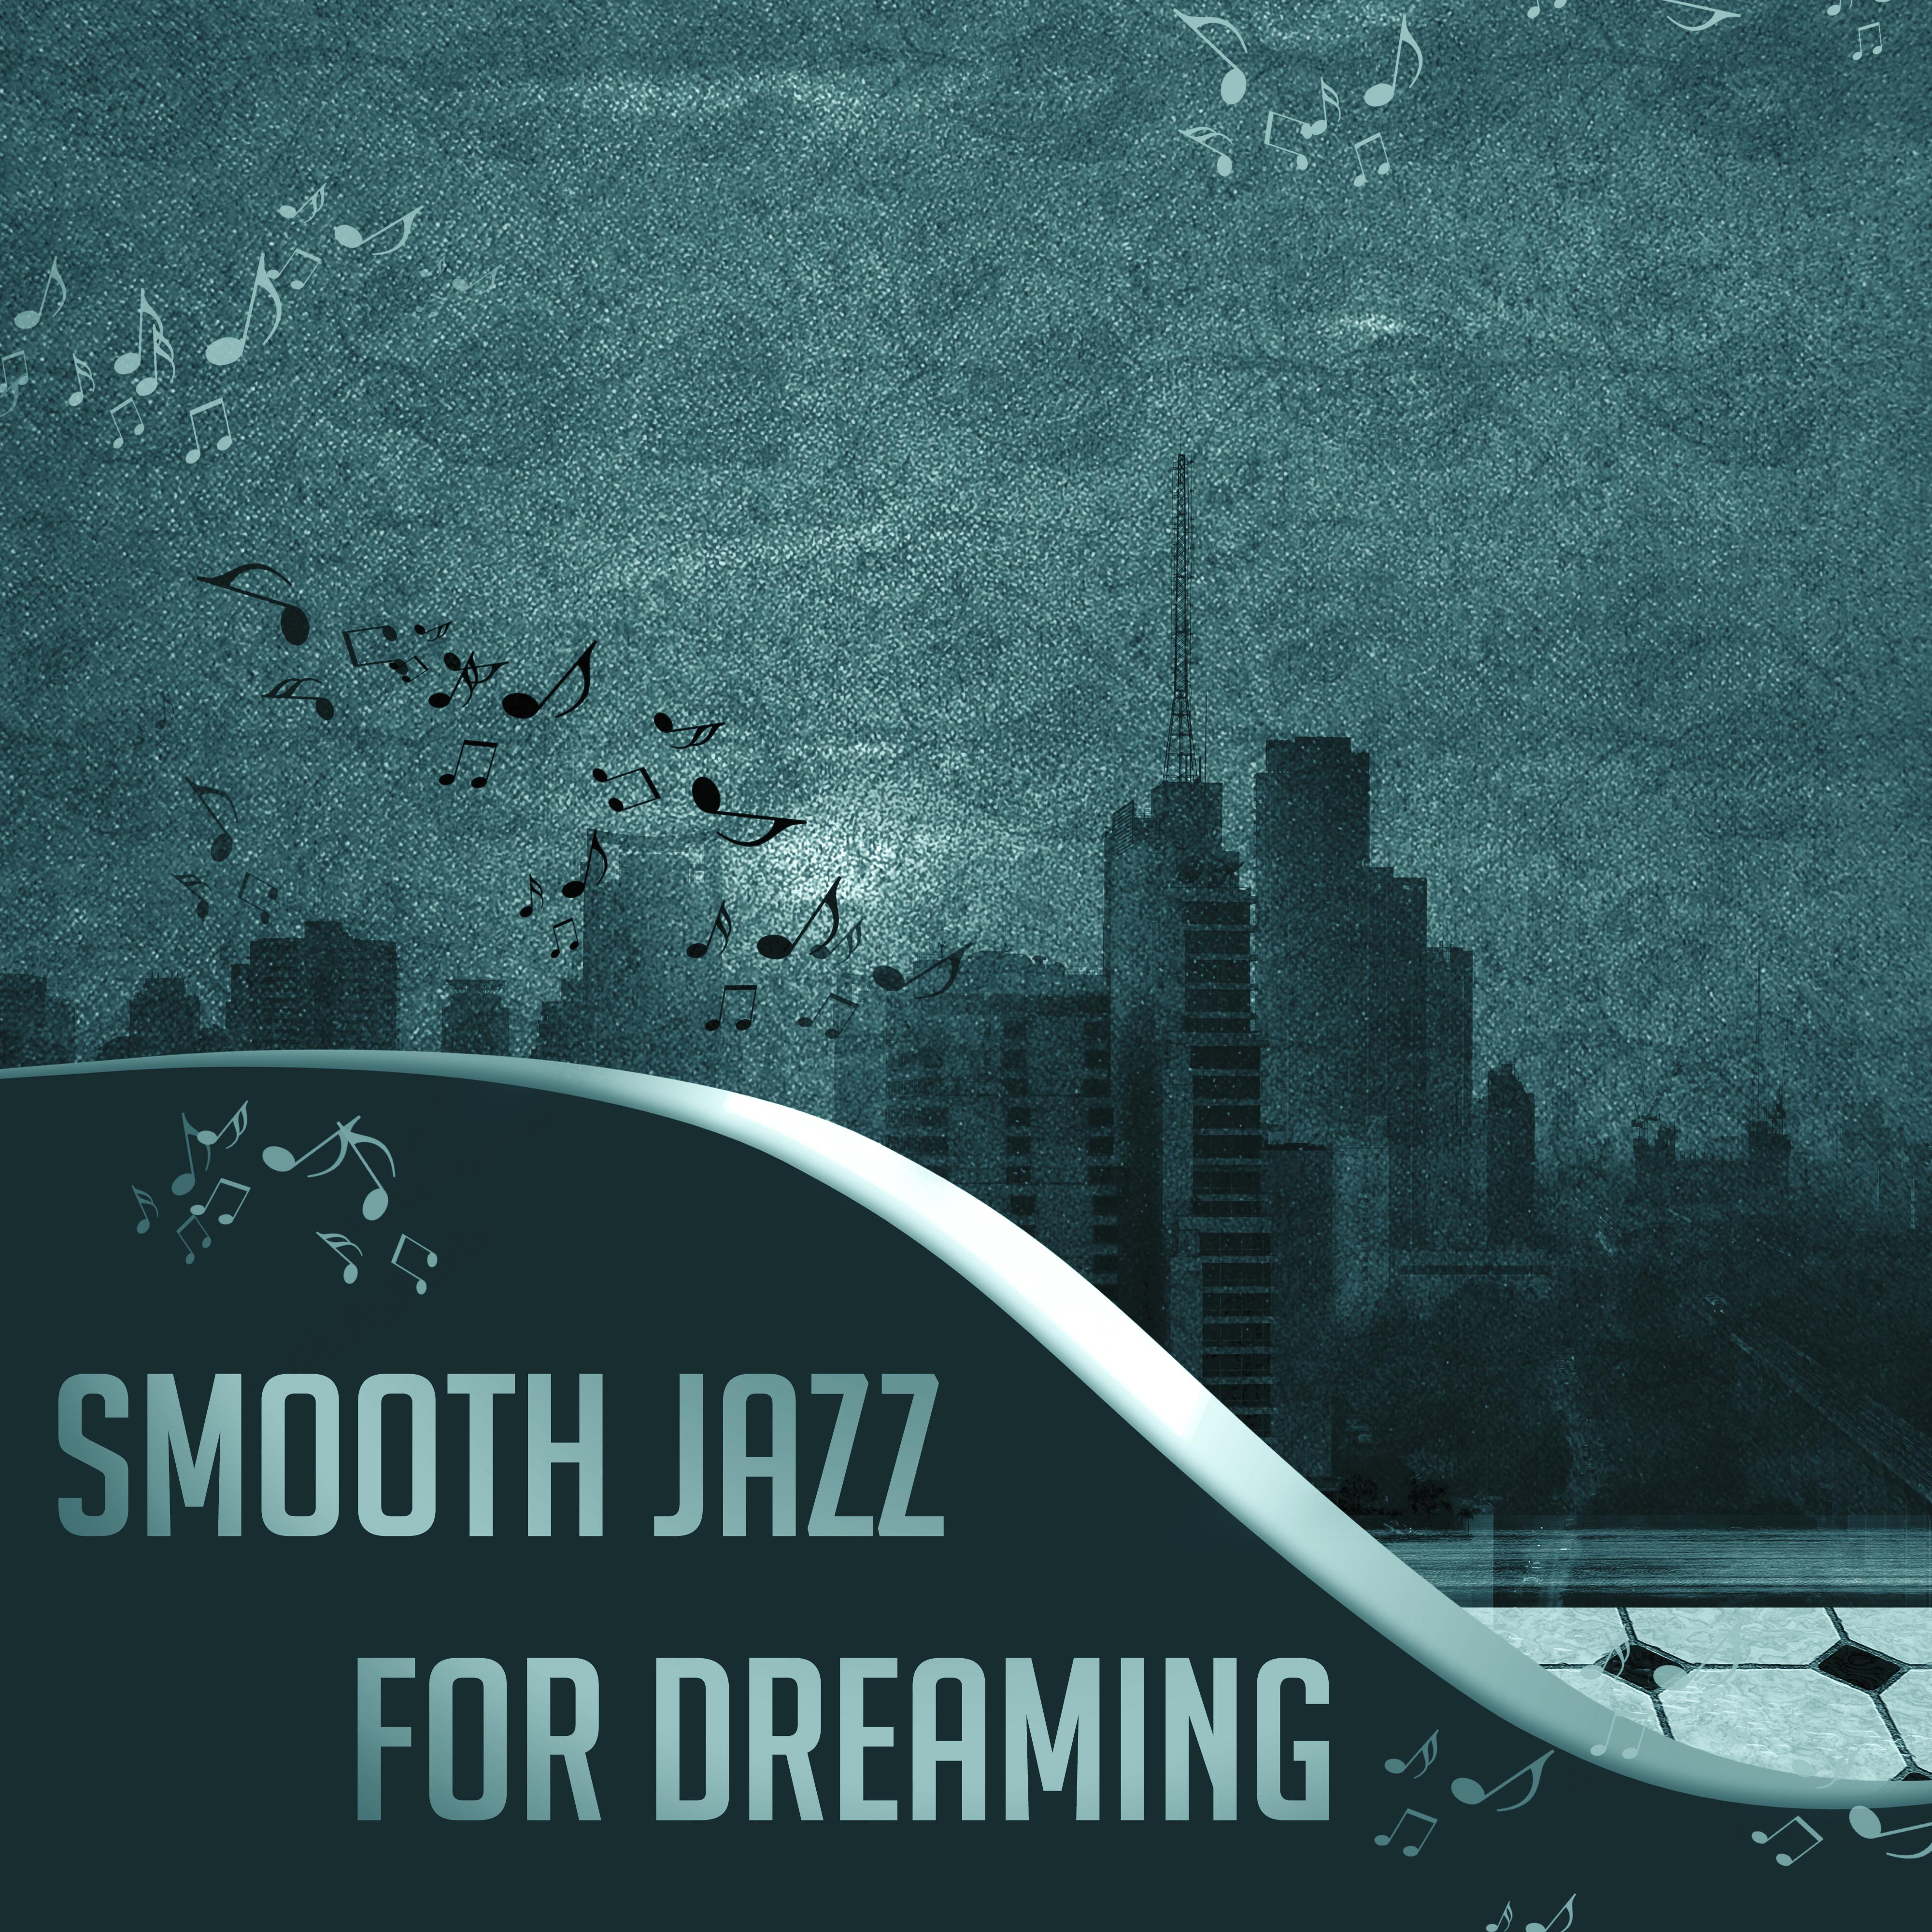 Smooth Jazz for Dreaming  Sleep Well with Jazz Music, Soft Piano Note, Instrumental Sounds